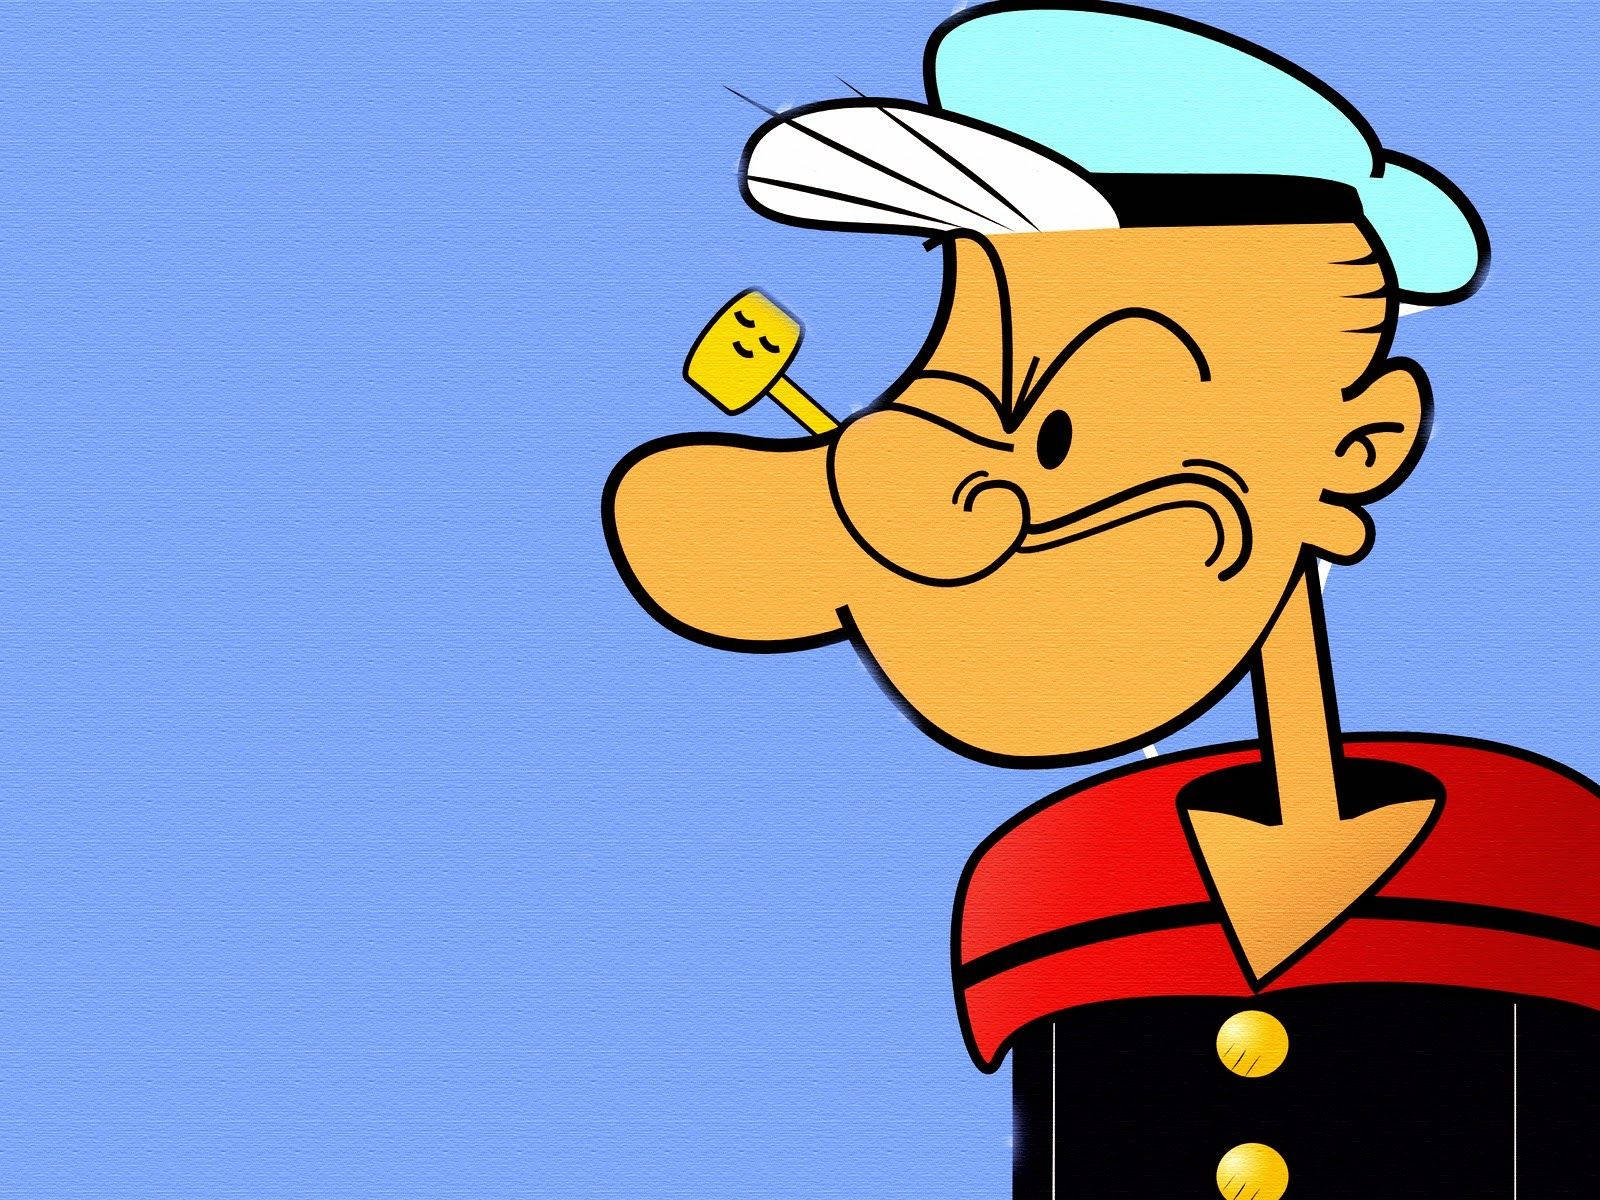 Popeye's Serious Face Background